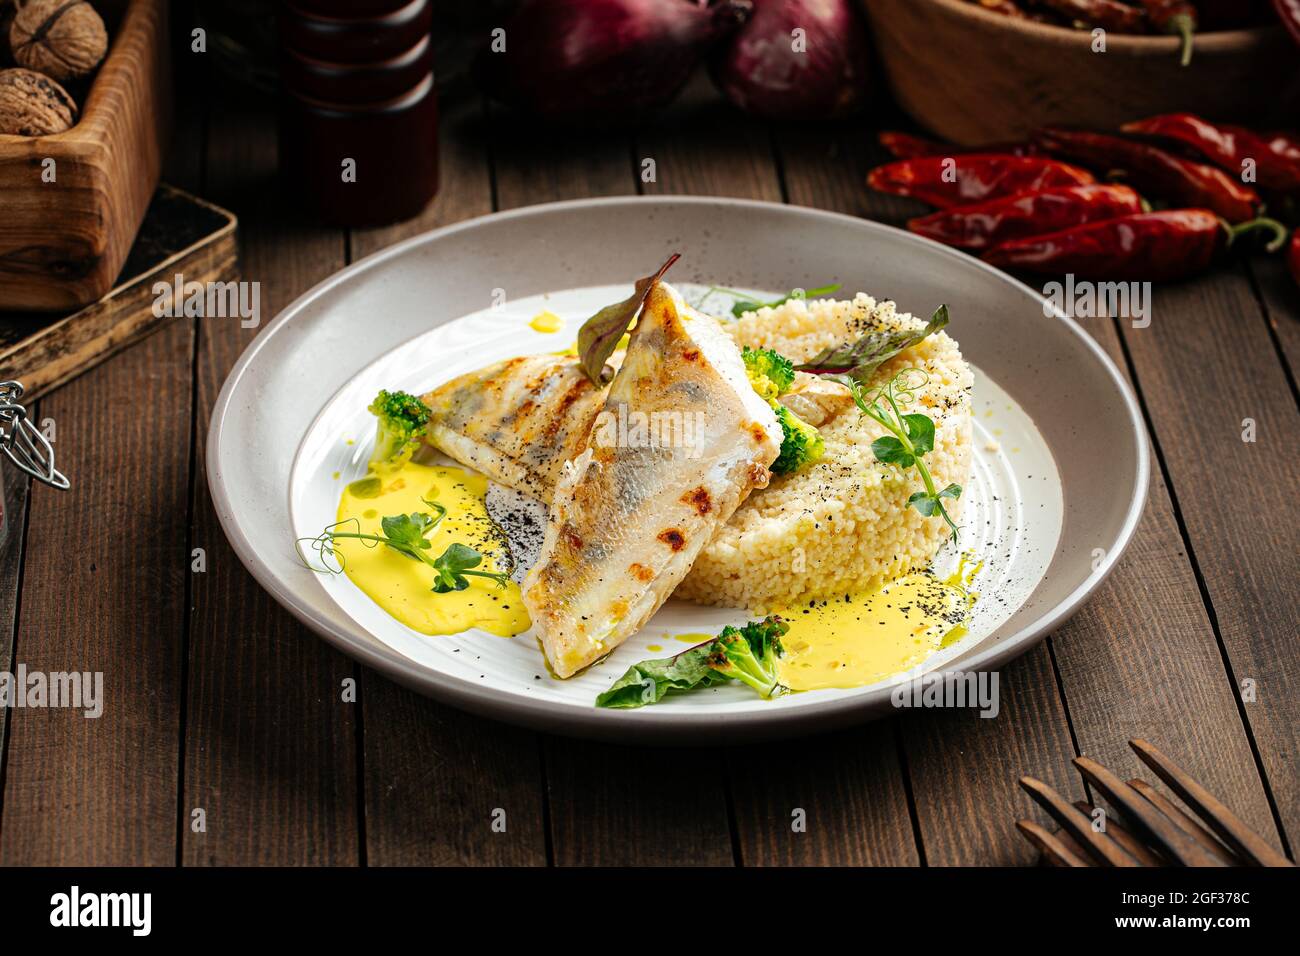 Pike perch fillet on couscous and bearnaise sauce Stock Photo